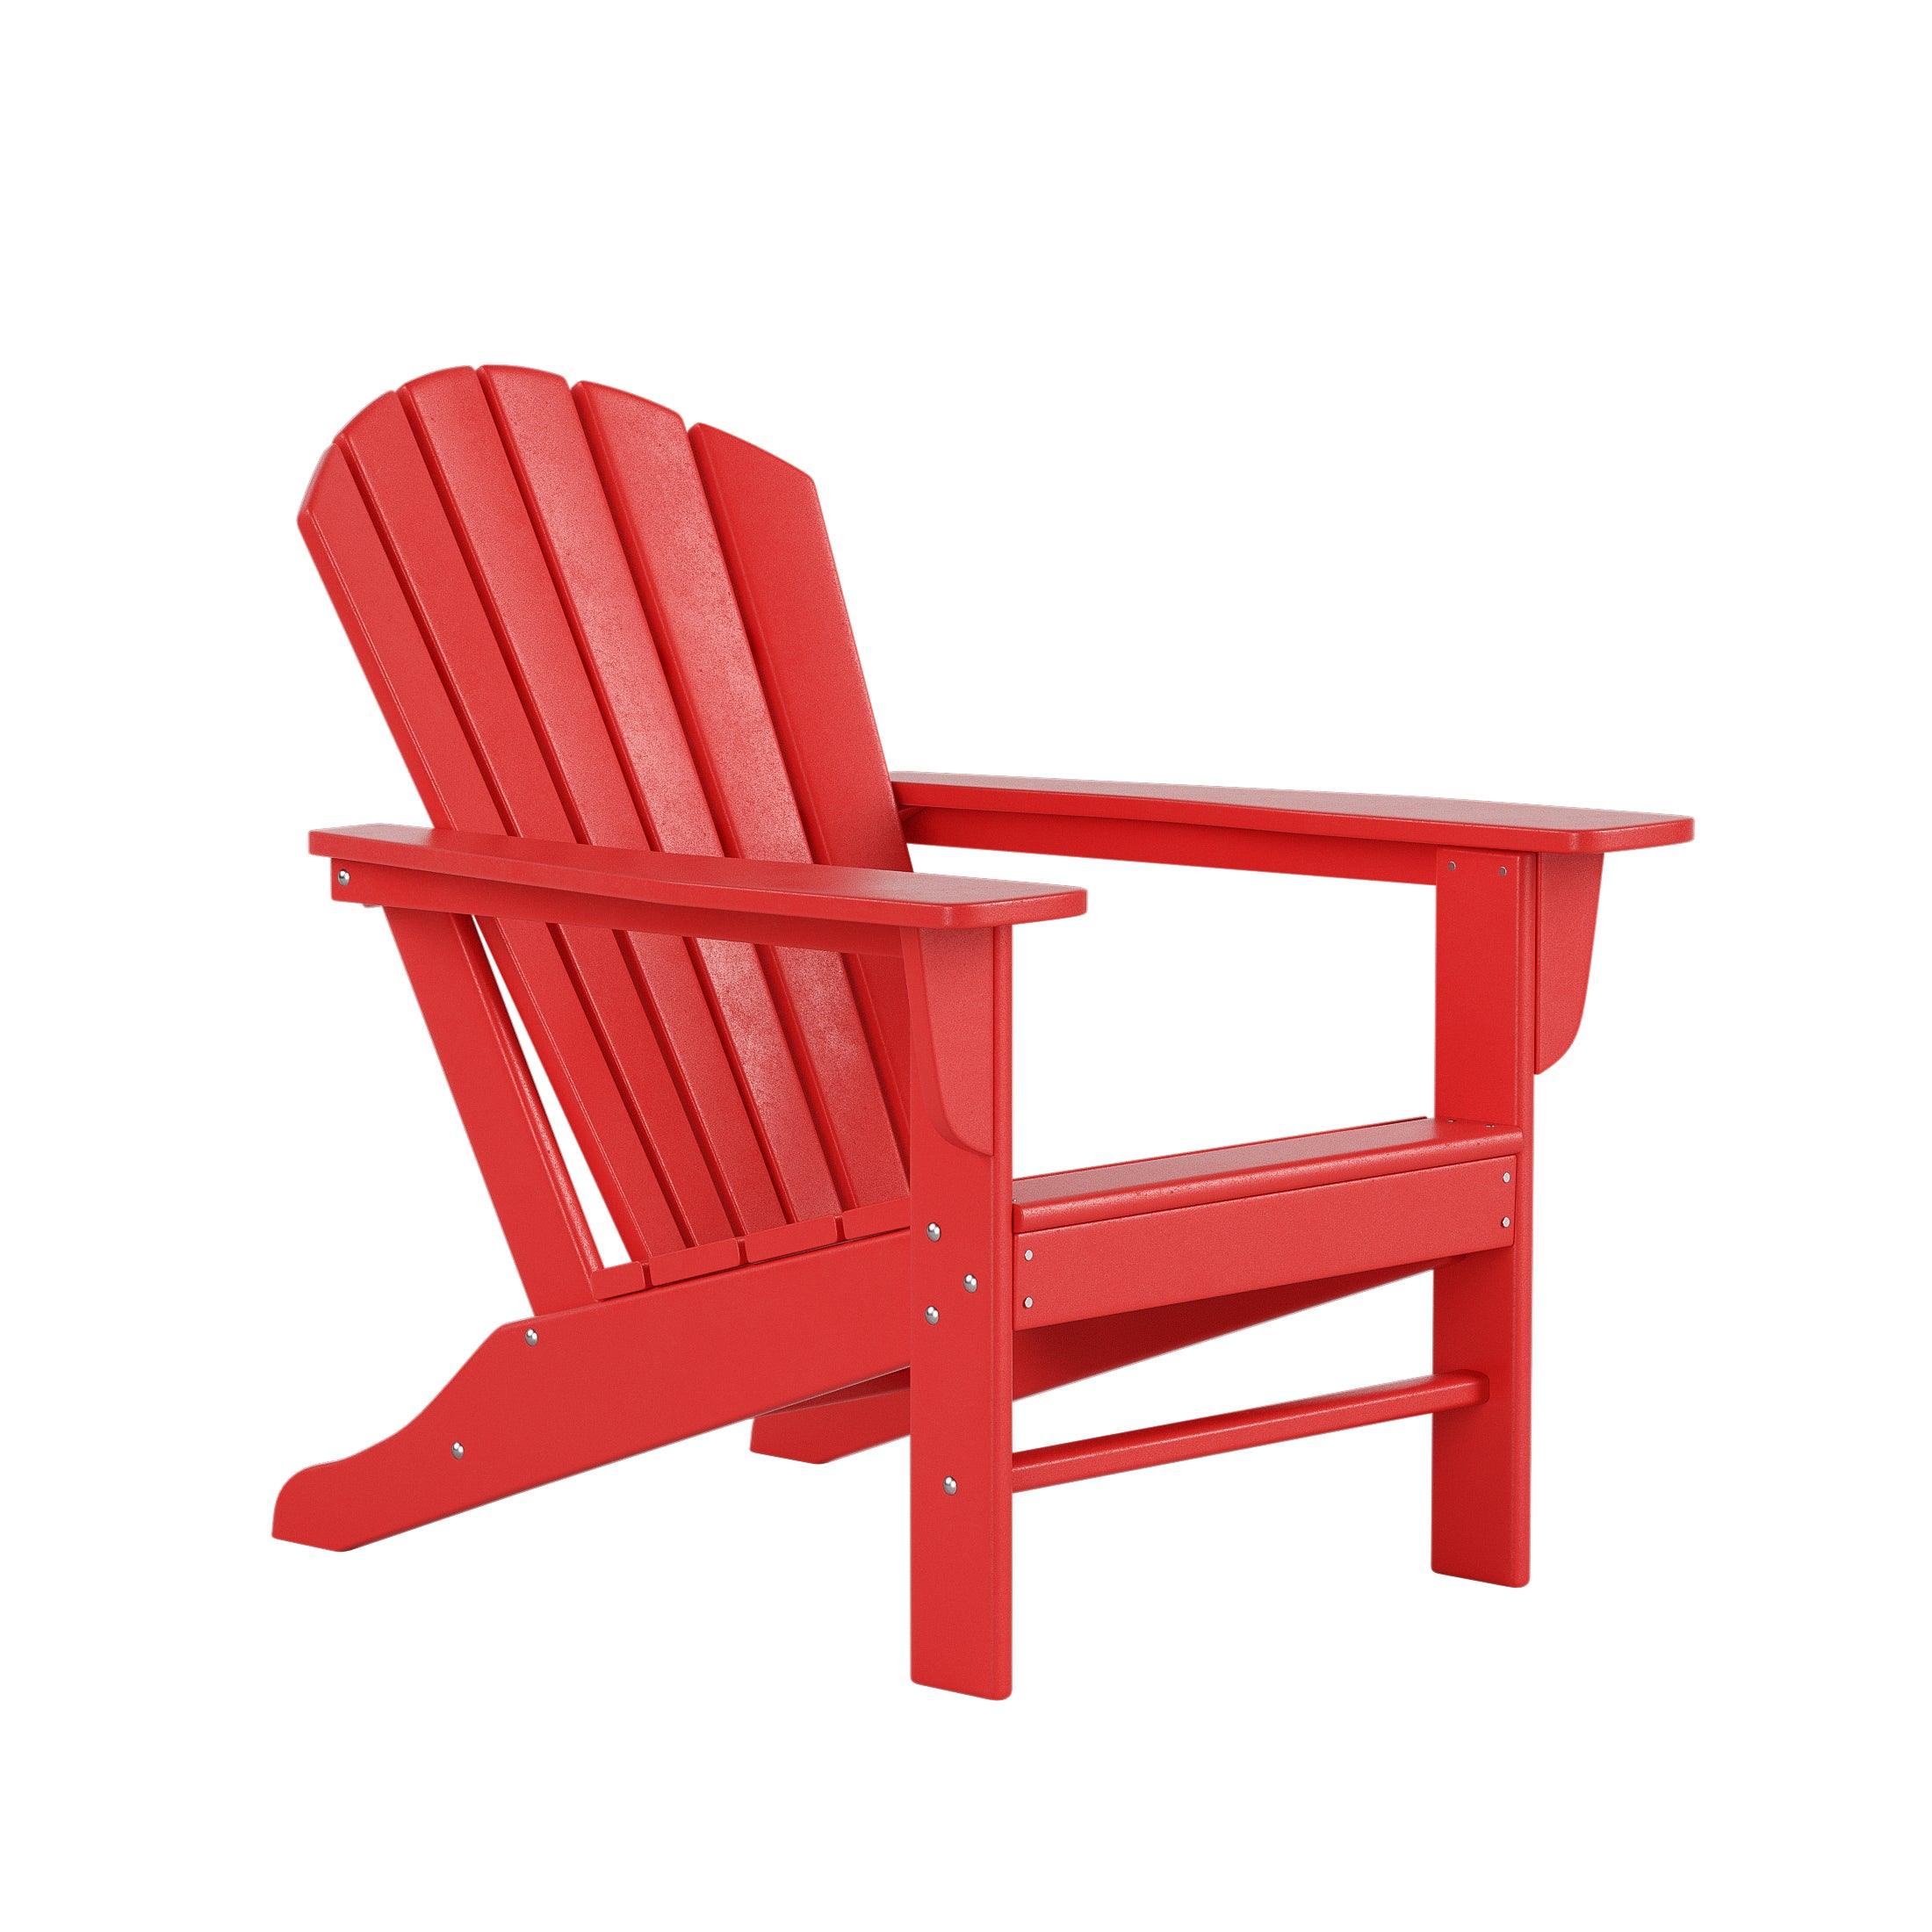 Portside 2-Piece Set Classic Outdoor Adirondack Chair with Footrest Ottoman - Costaelm